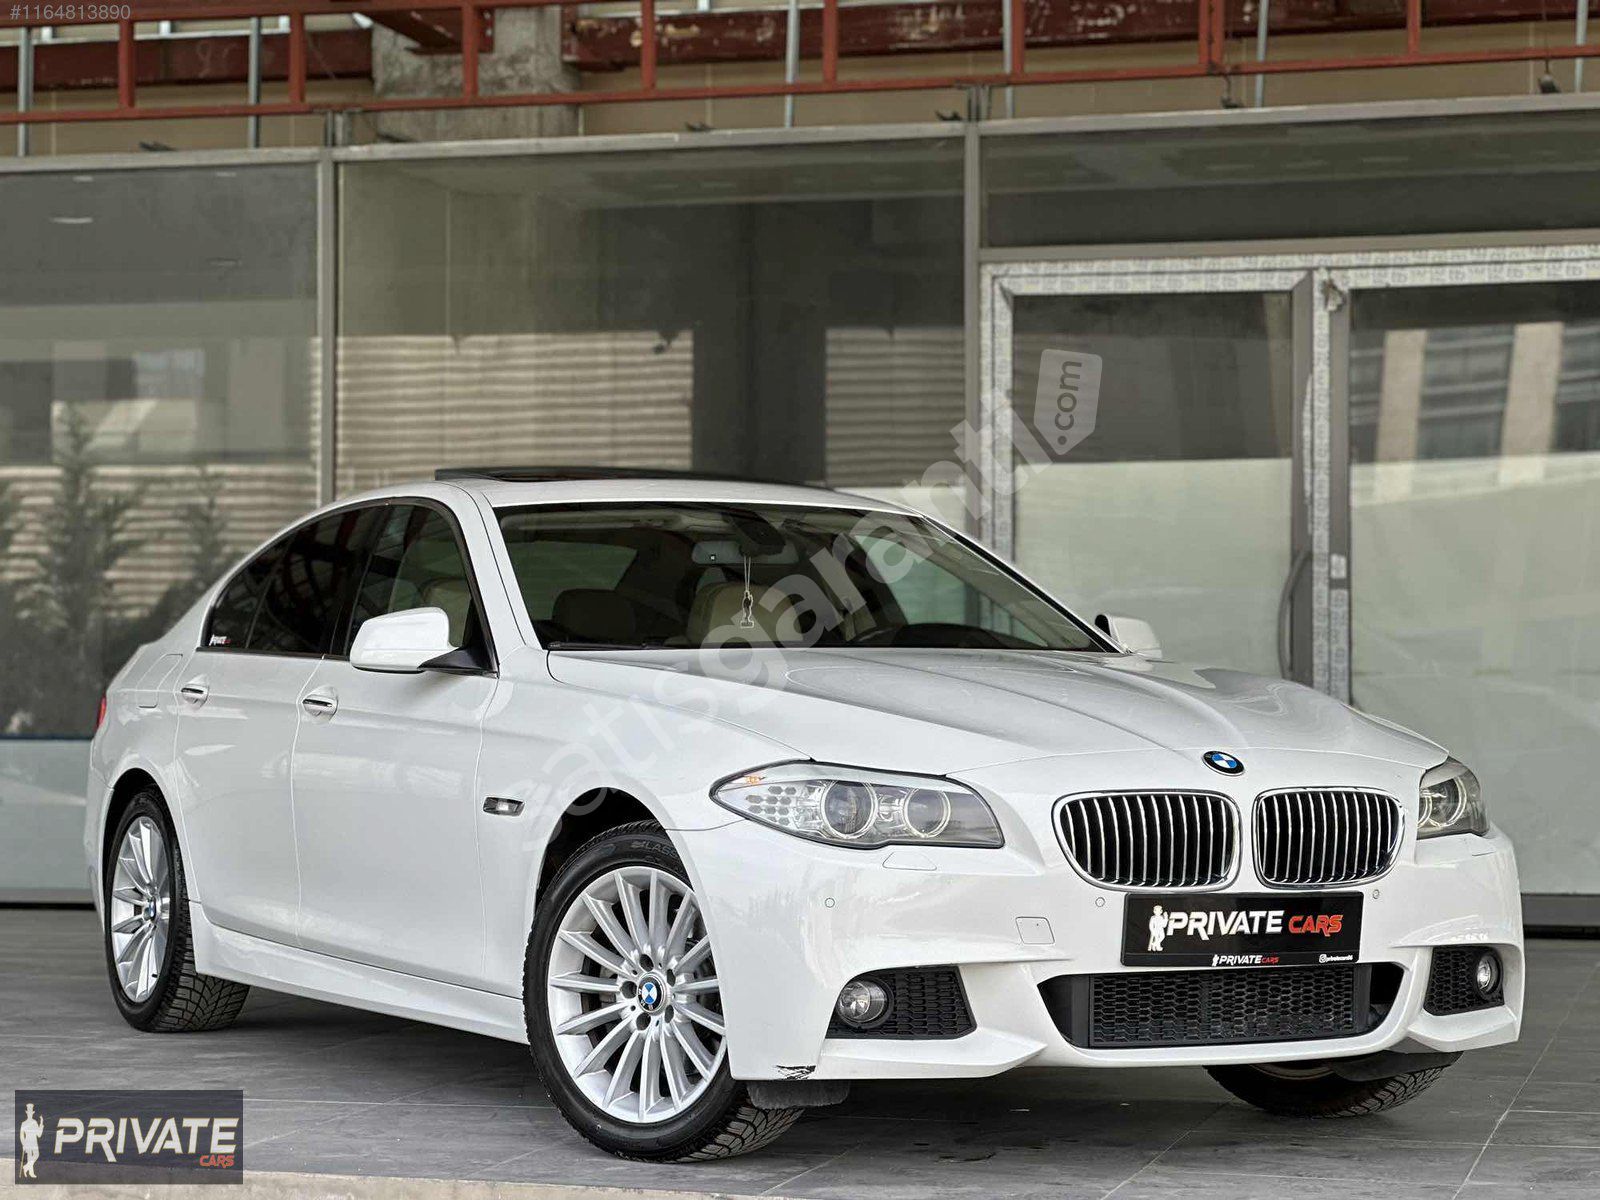 Private CARS 2011 BMW 5.20D SPECİAL EDİTİON - NBT - BEL KIRMA